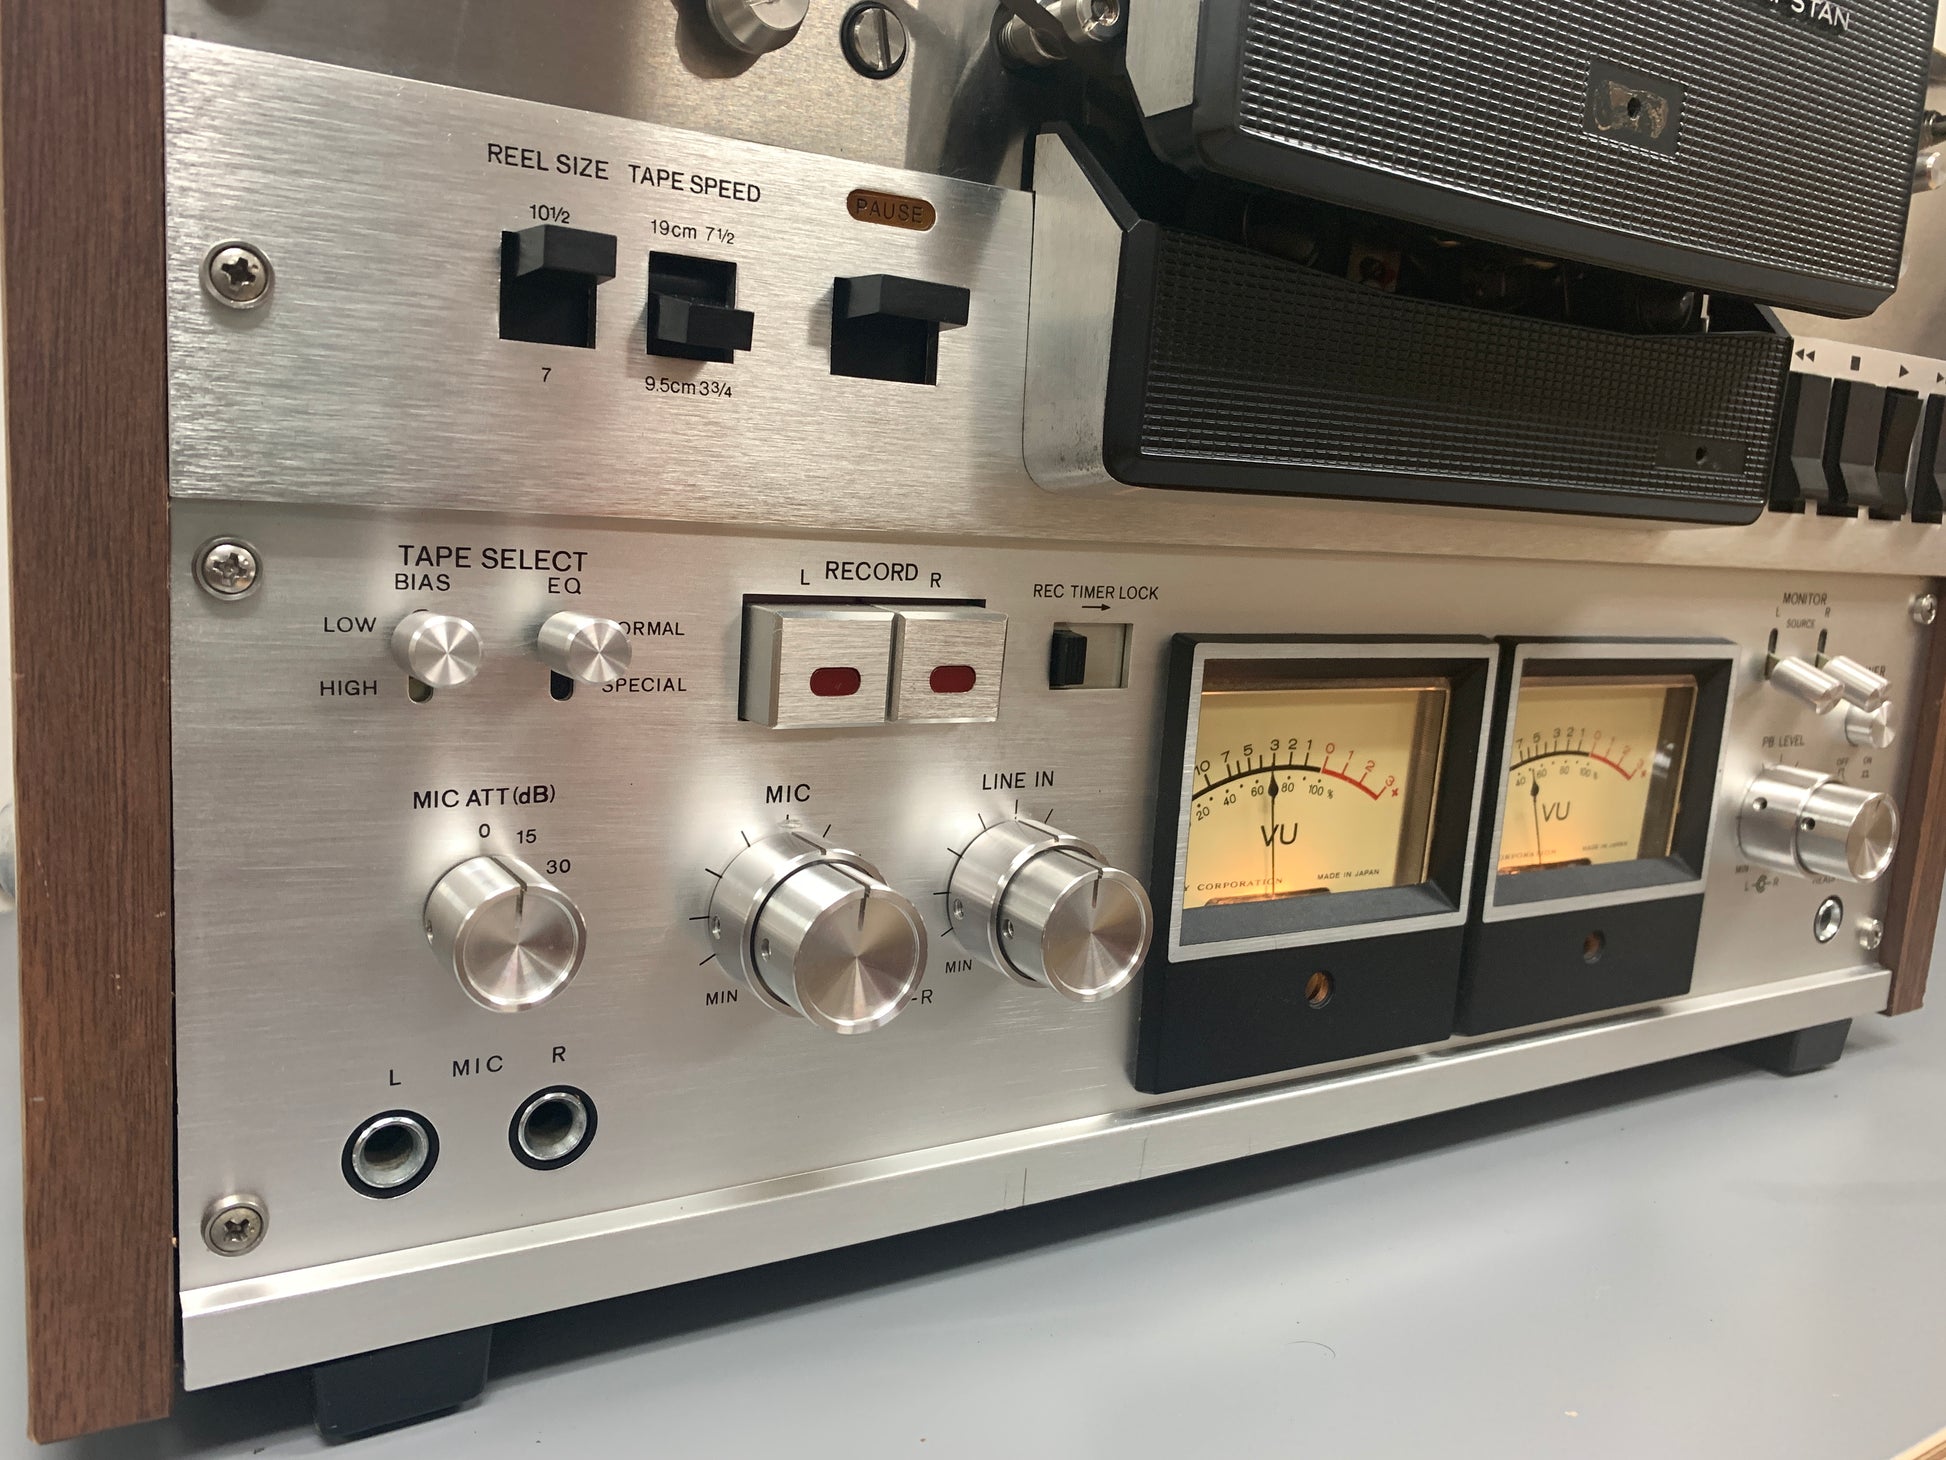 Sony TC-755 Reel to Reel Deck – The Turntable Store